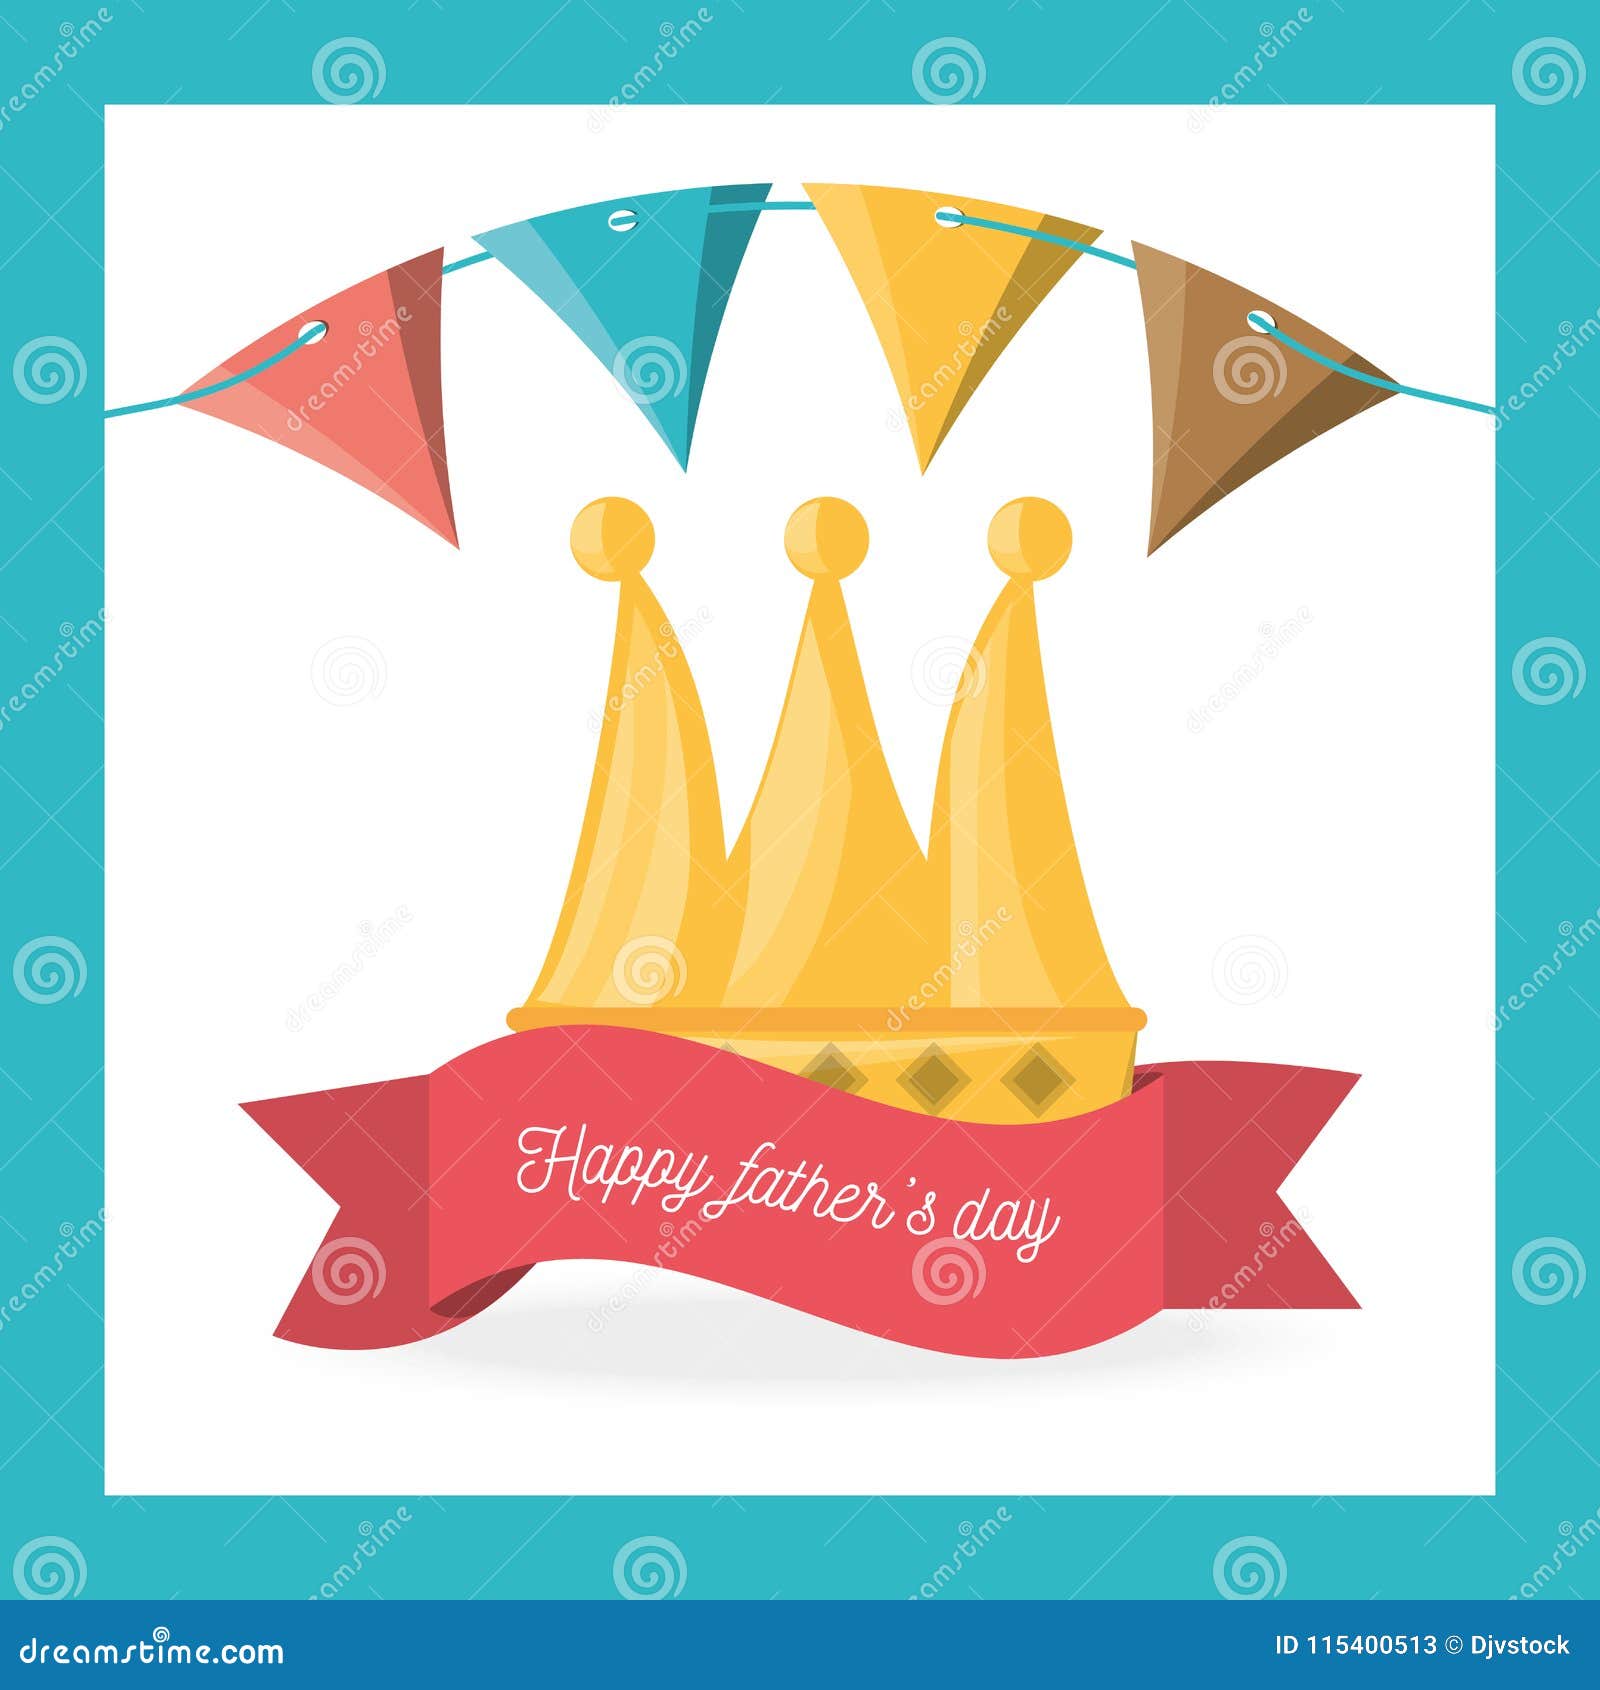 Download Fathers Day Celebration With Party Flags And Ribbon Stock ...